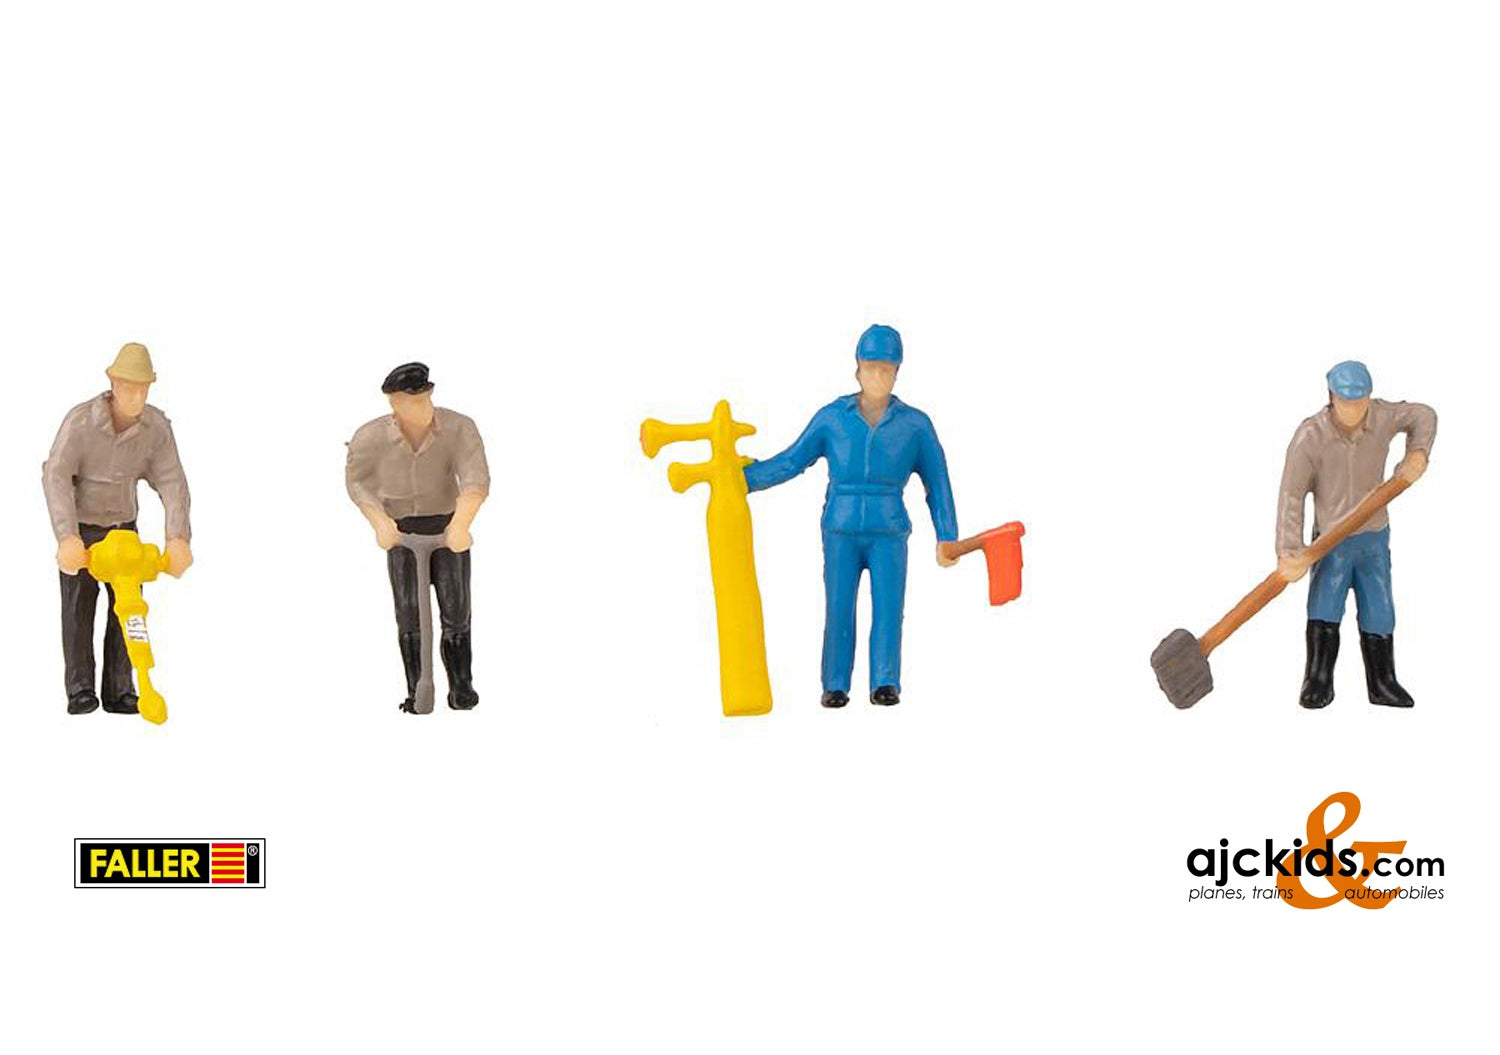 Faller 180238 - Railway construction workers & signal horn Figurine set with mini sound effect